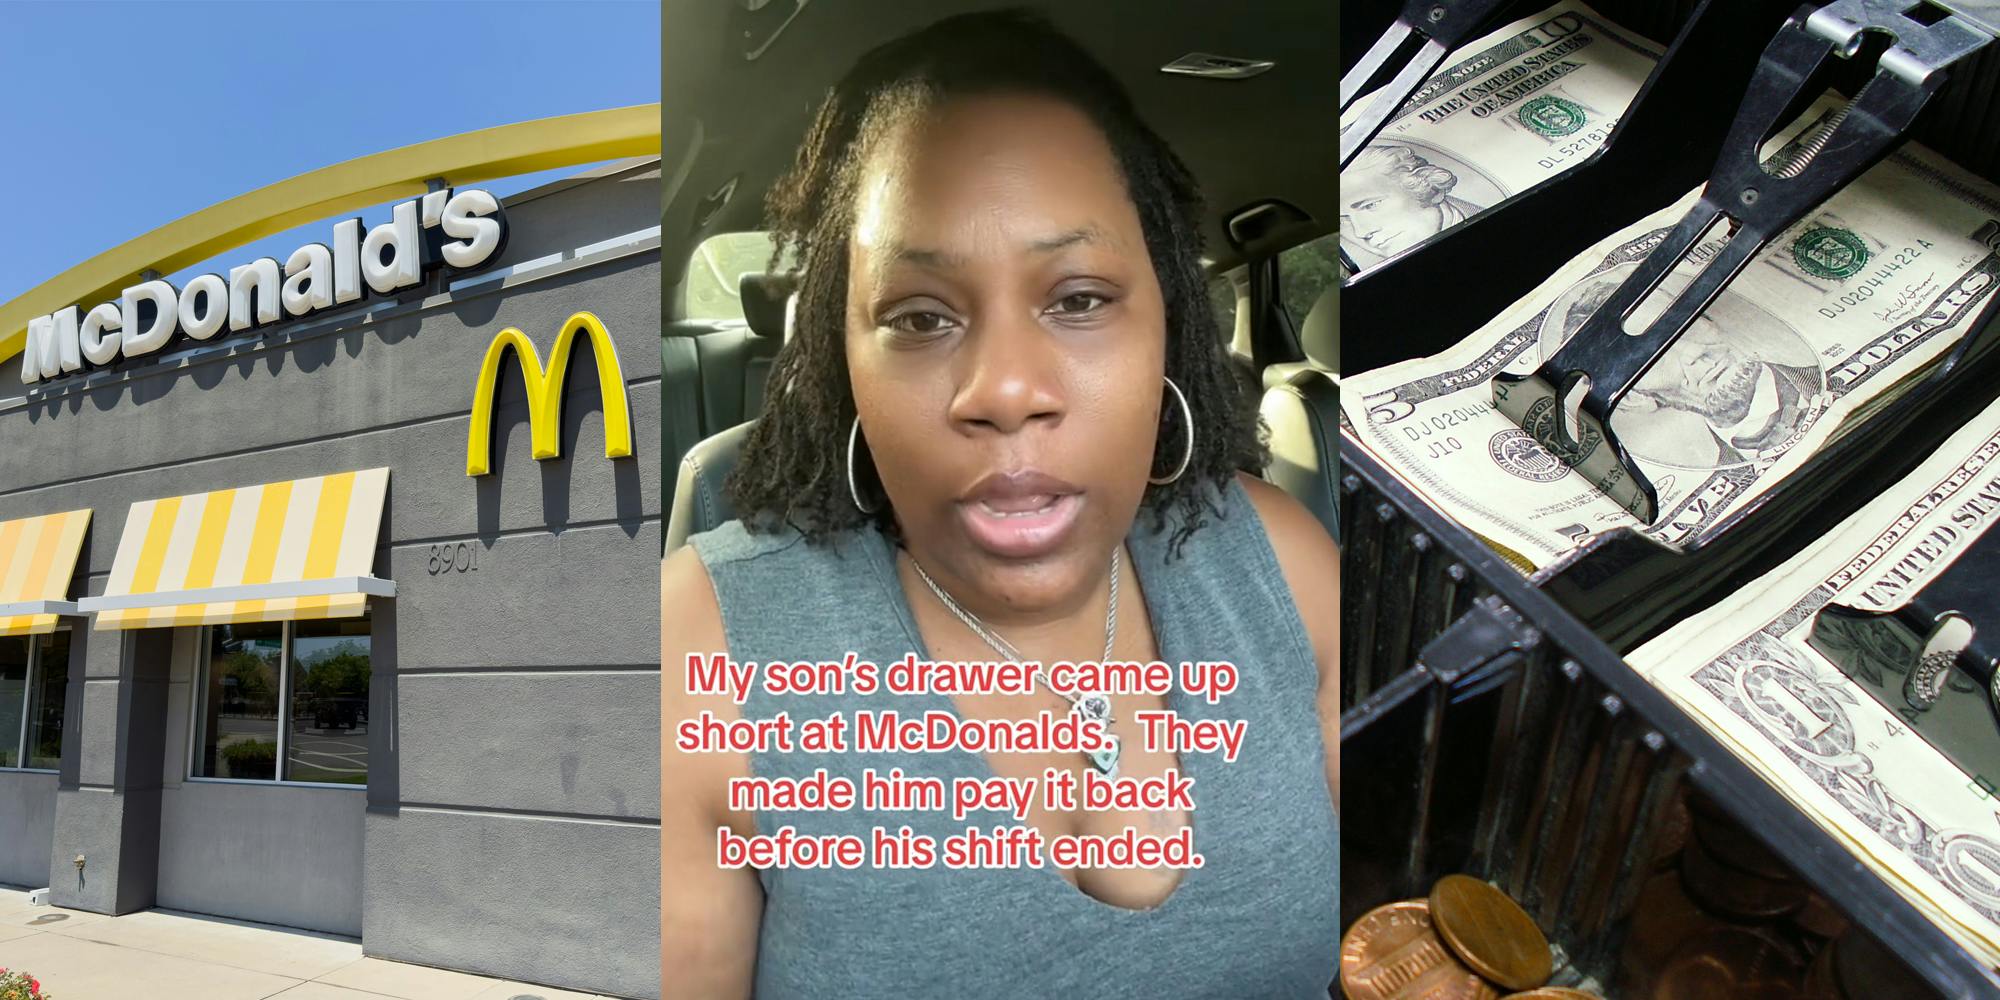 McDonald's building with signs (l) McDonald's worker's mother speaking in car with caption "My son's drawer came up short at McDonald's. They made him pay it back before his shift ended." (c) open cash register drawer (r)